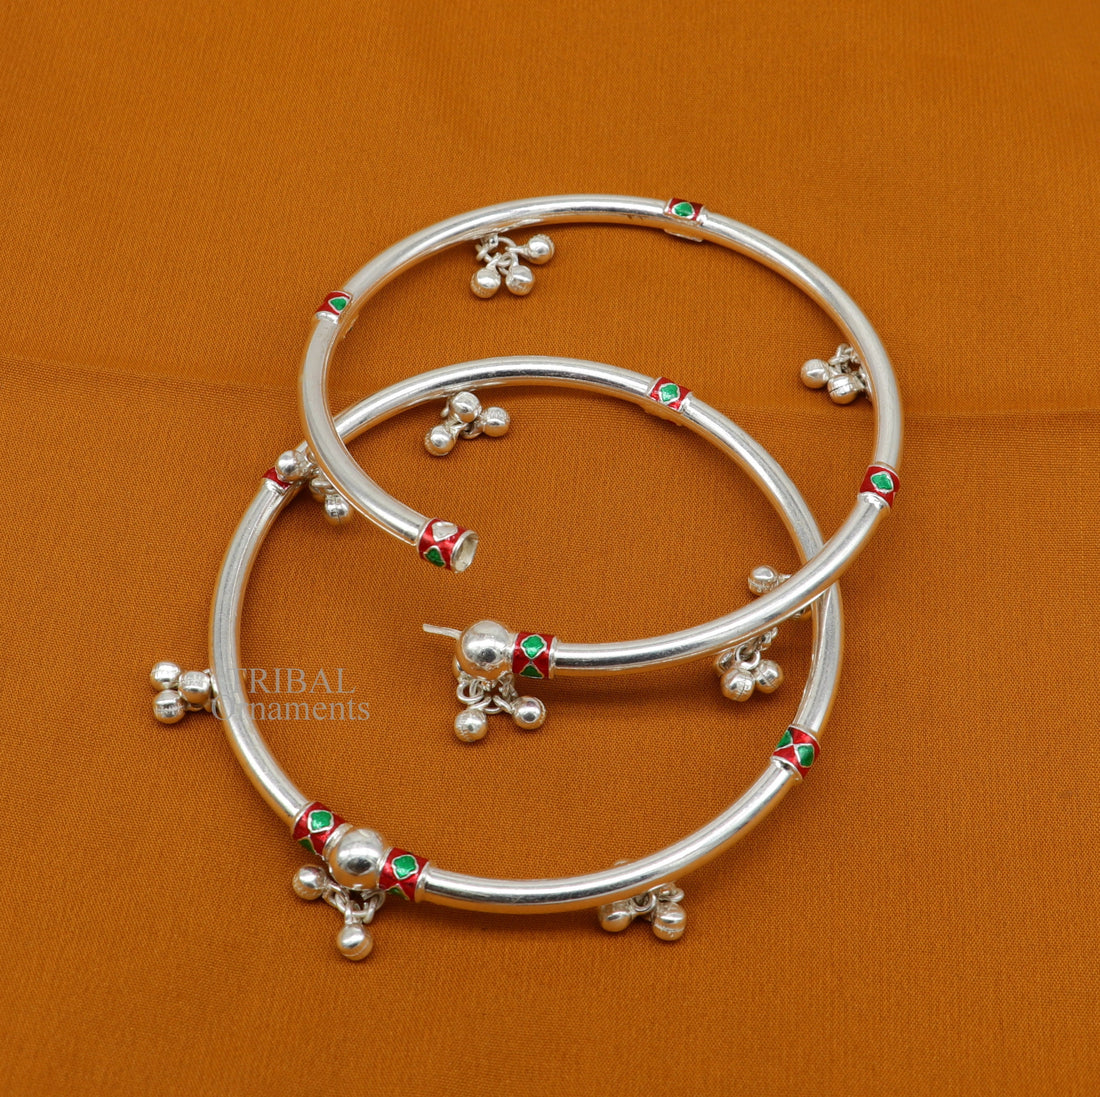 925 sterling silver handmade amazing foot ankle plain bracelet kada with hanging noisy bells, belly dance jewelry from Rajasthan nsfk59 - TRIBAL ORNAMENTS